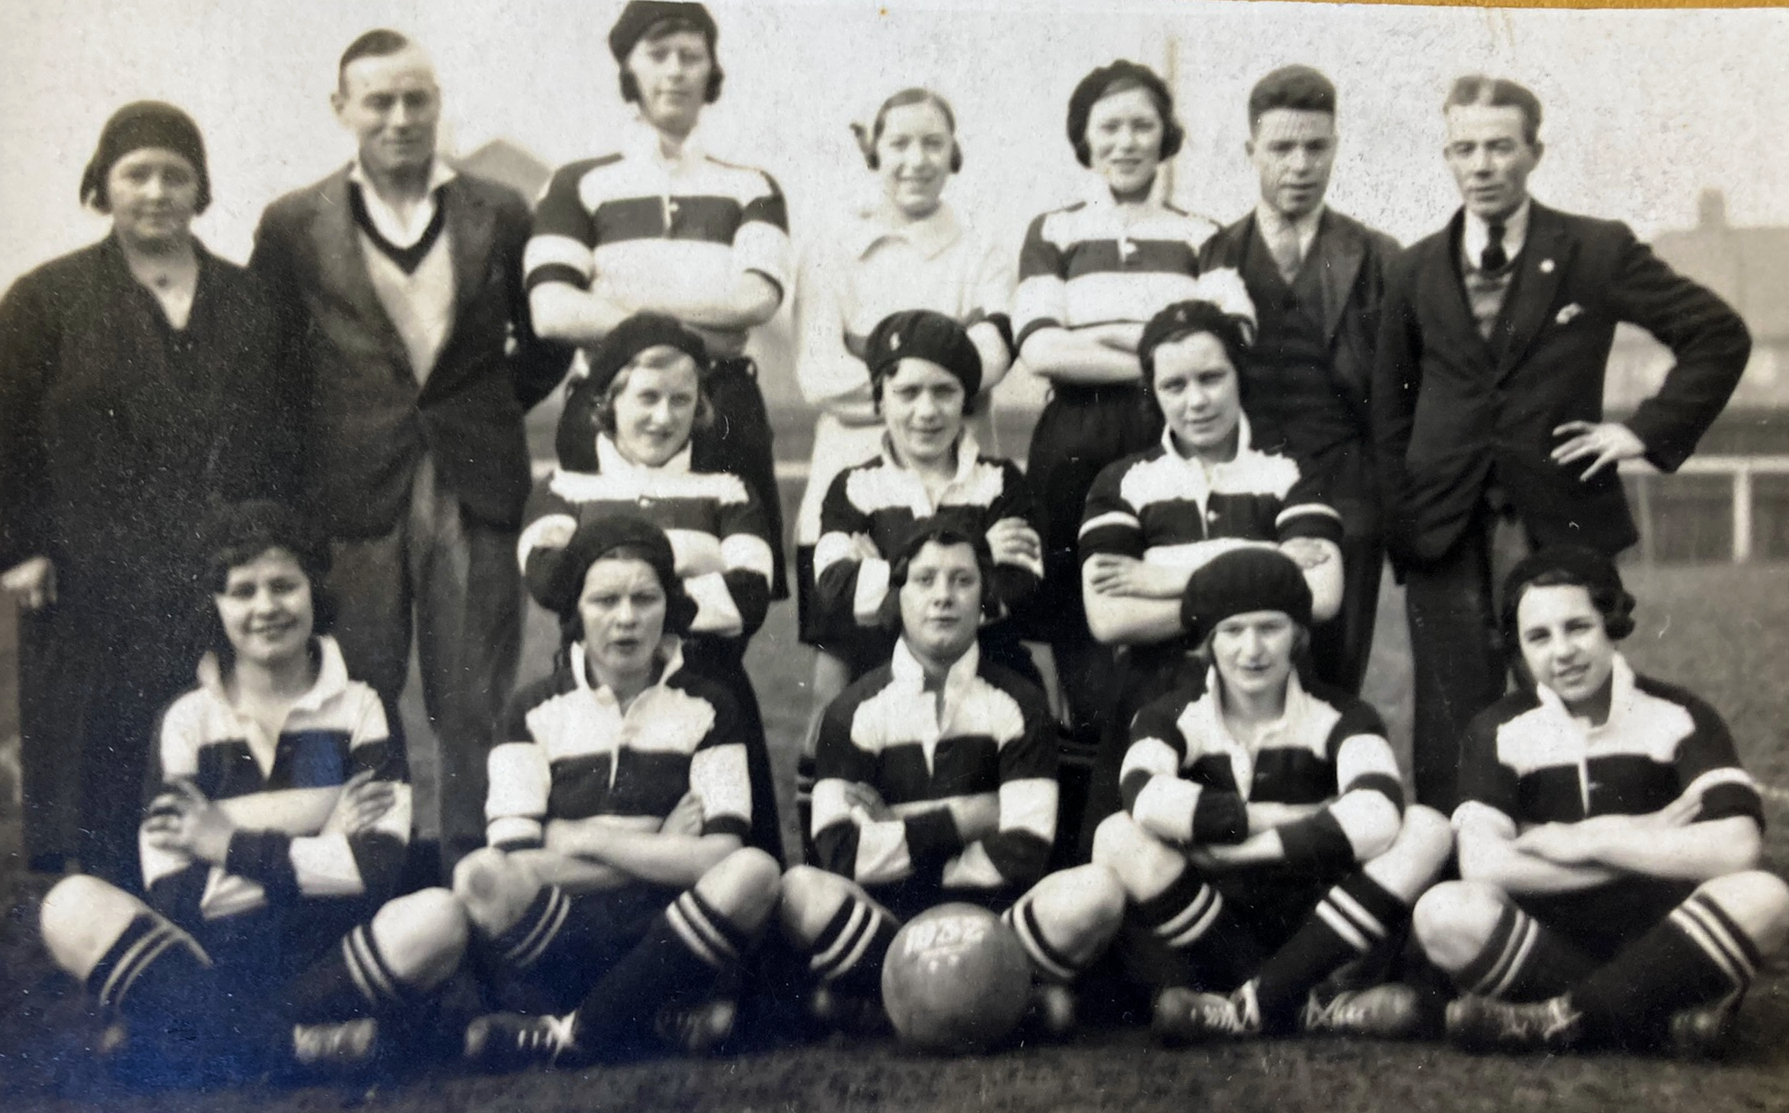 The Quaker Ladies in 1932 with Lillie on the left of the back row. This was probably taken at the RA ground in Brinkburn Road before the Good Friday match against Terrys Chocolate Girls, in which Betty Hooper scored both of Darlingtons goals in a 4-2